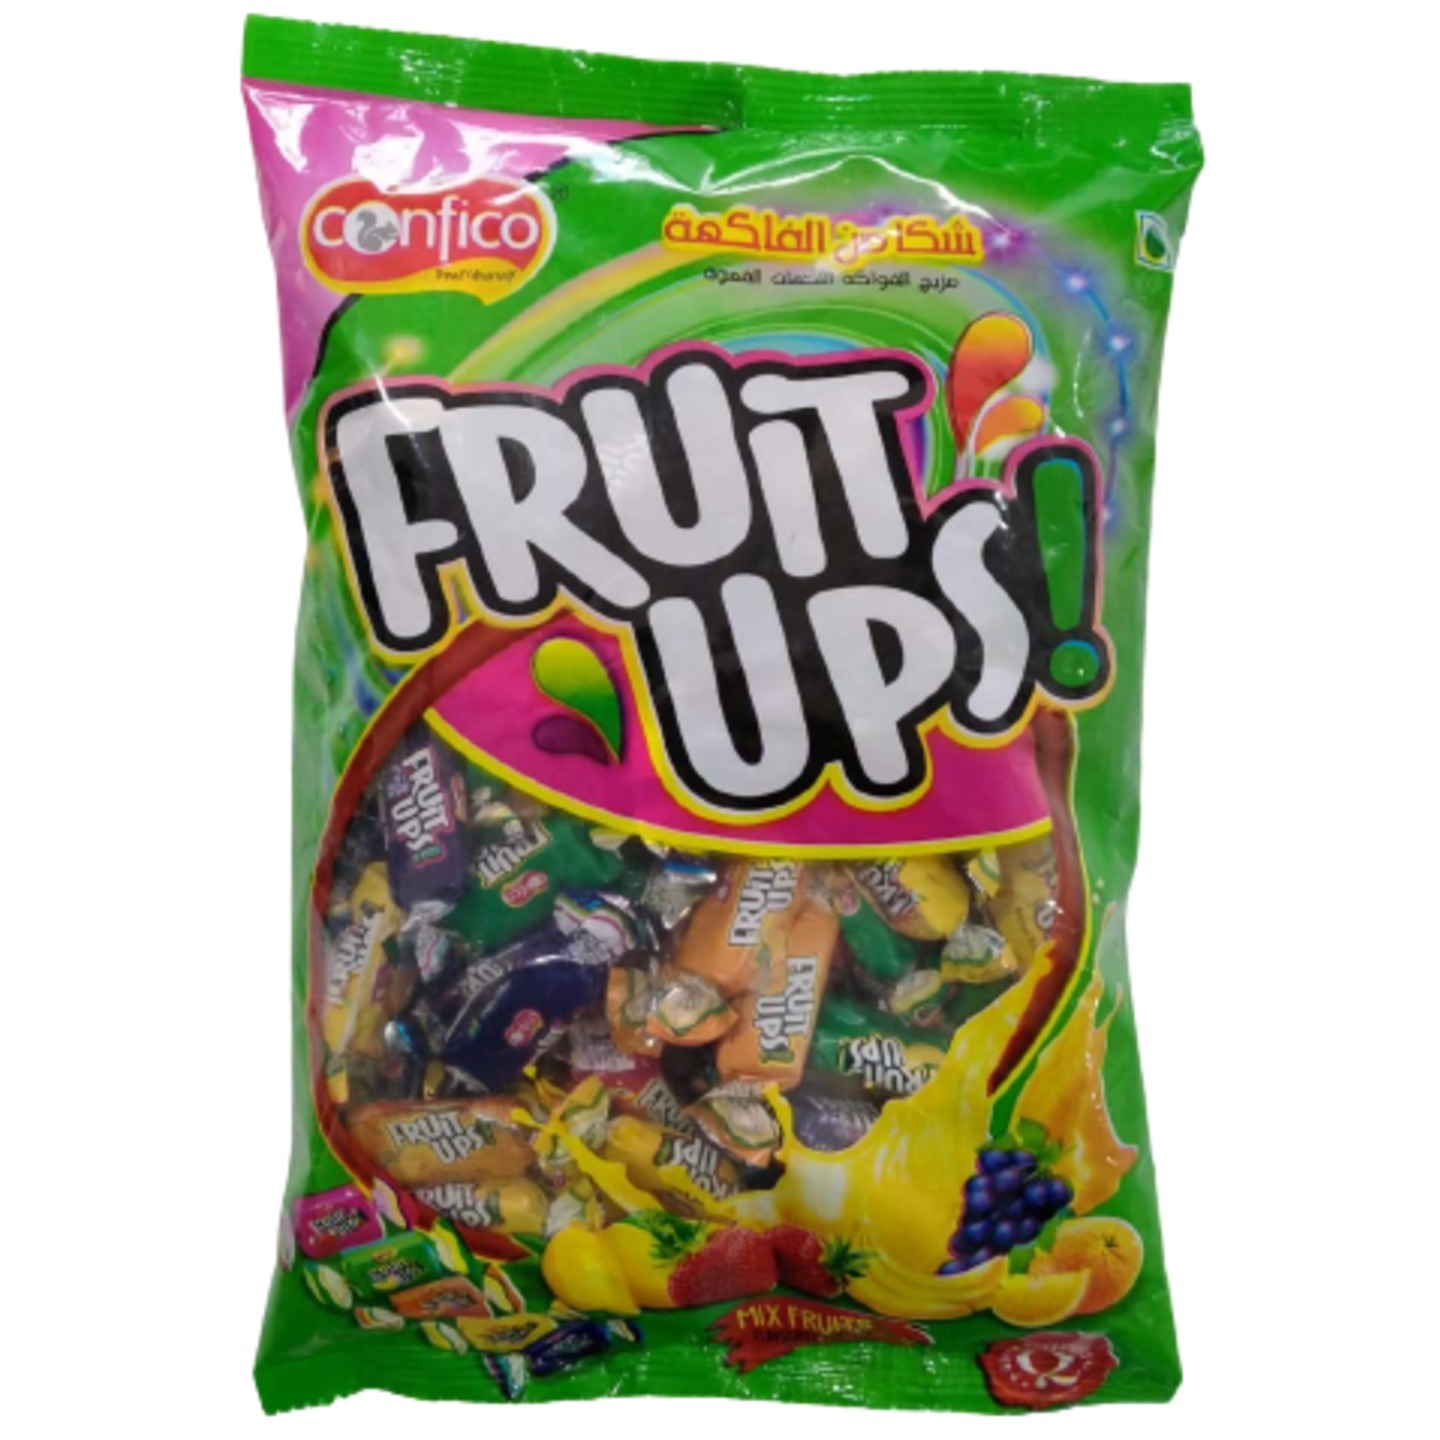 Confico Fruits ups Toffee Poly Mrp